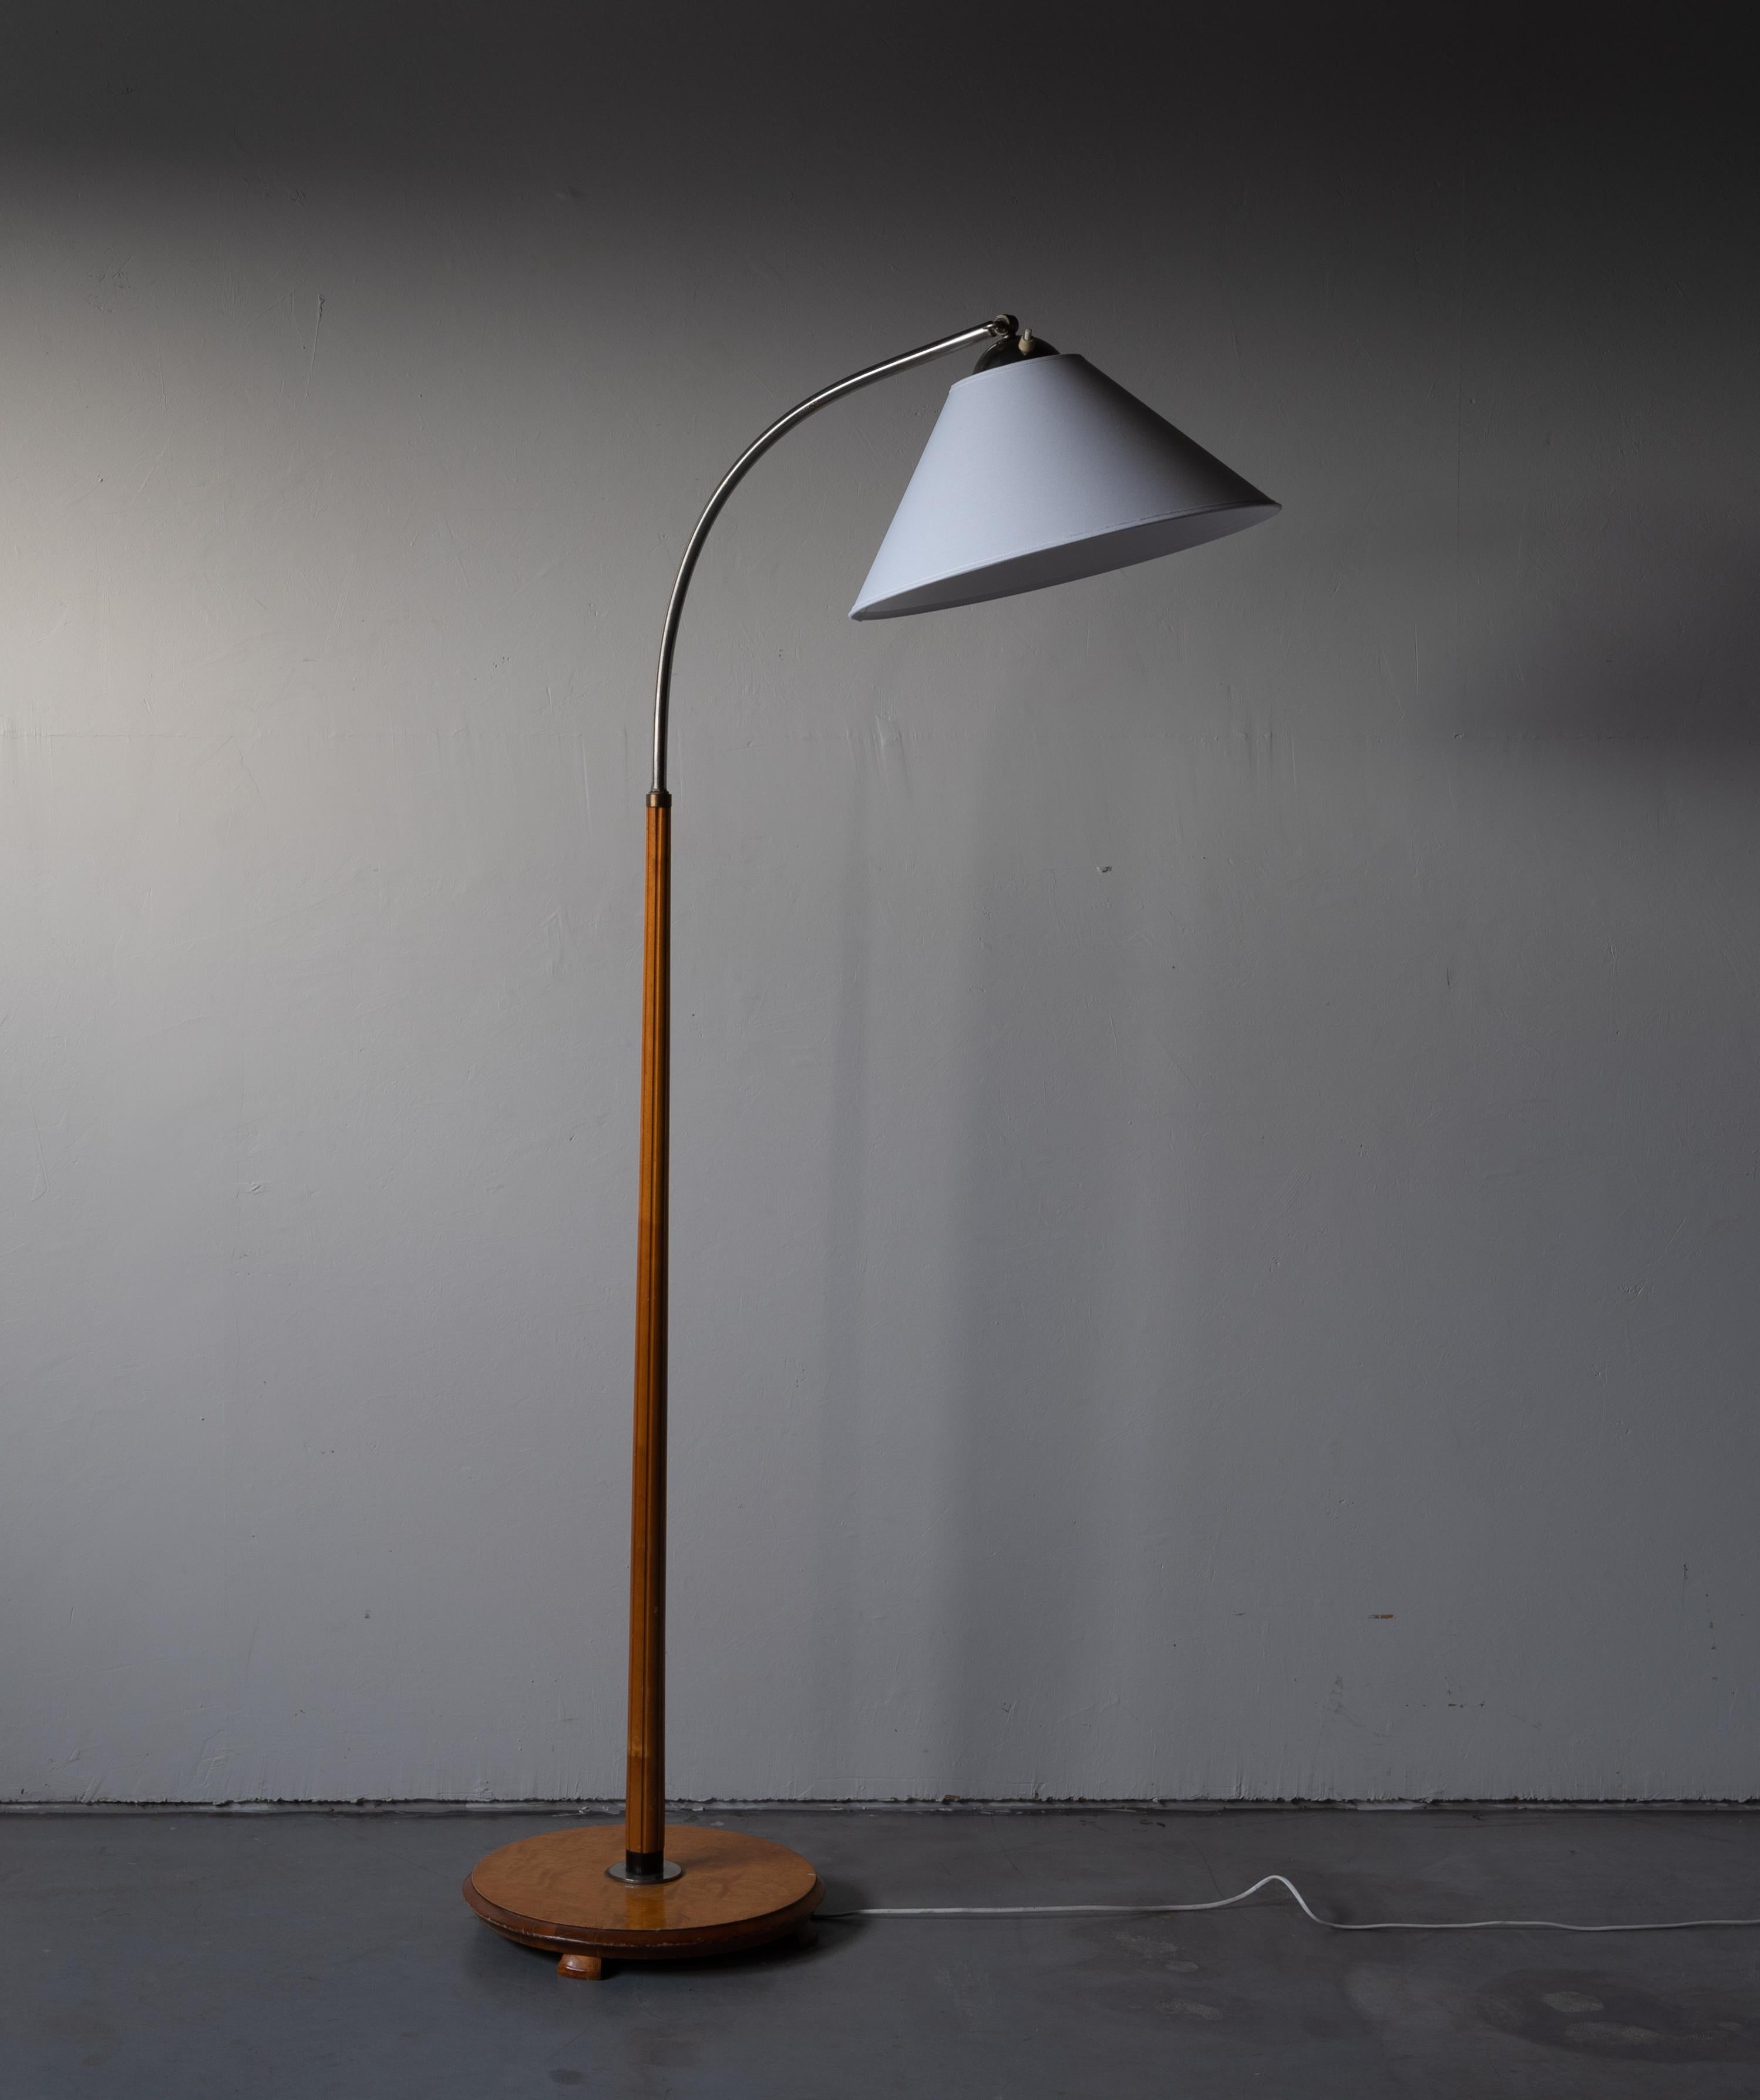 A functionalist floor lamp, designed and produced in Denmark, 1940s. Features brass. Brand new lampshade.

Stated dimensions with lampshade attached as is illustrated in the primary image.